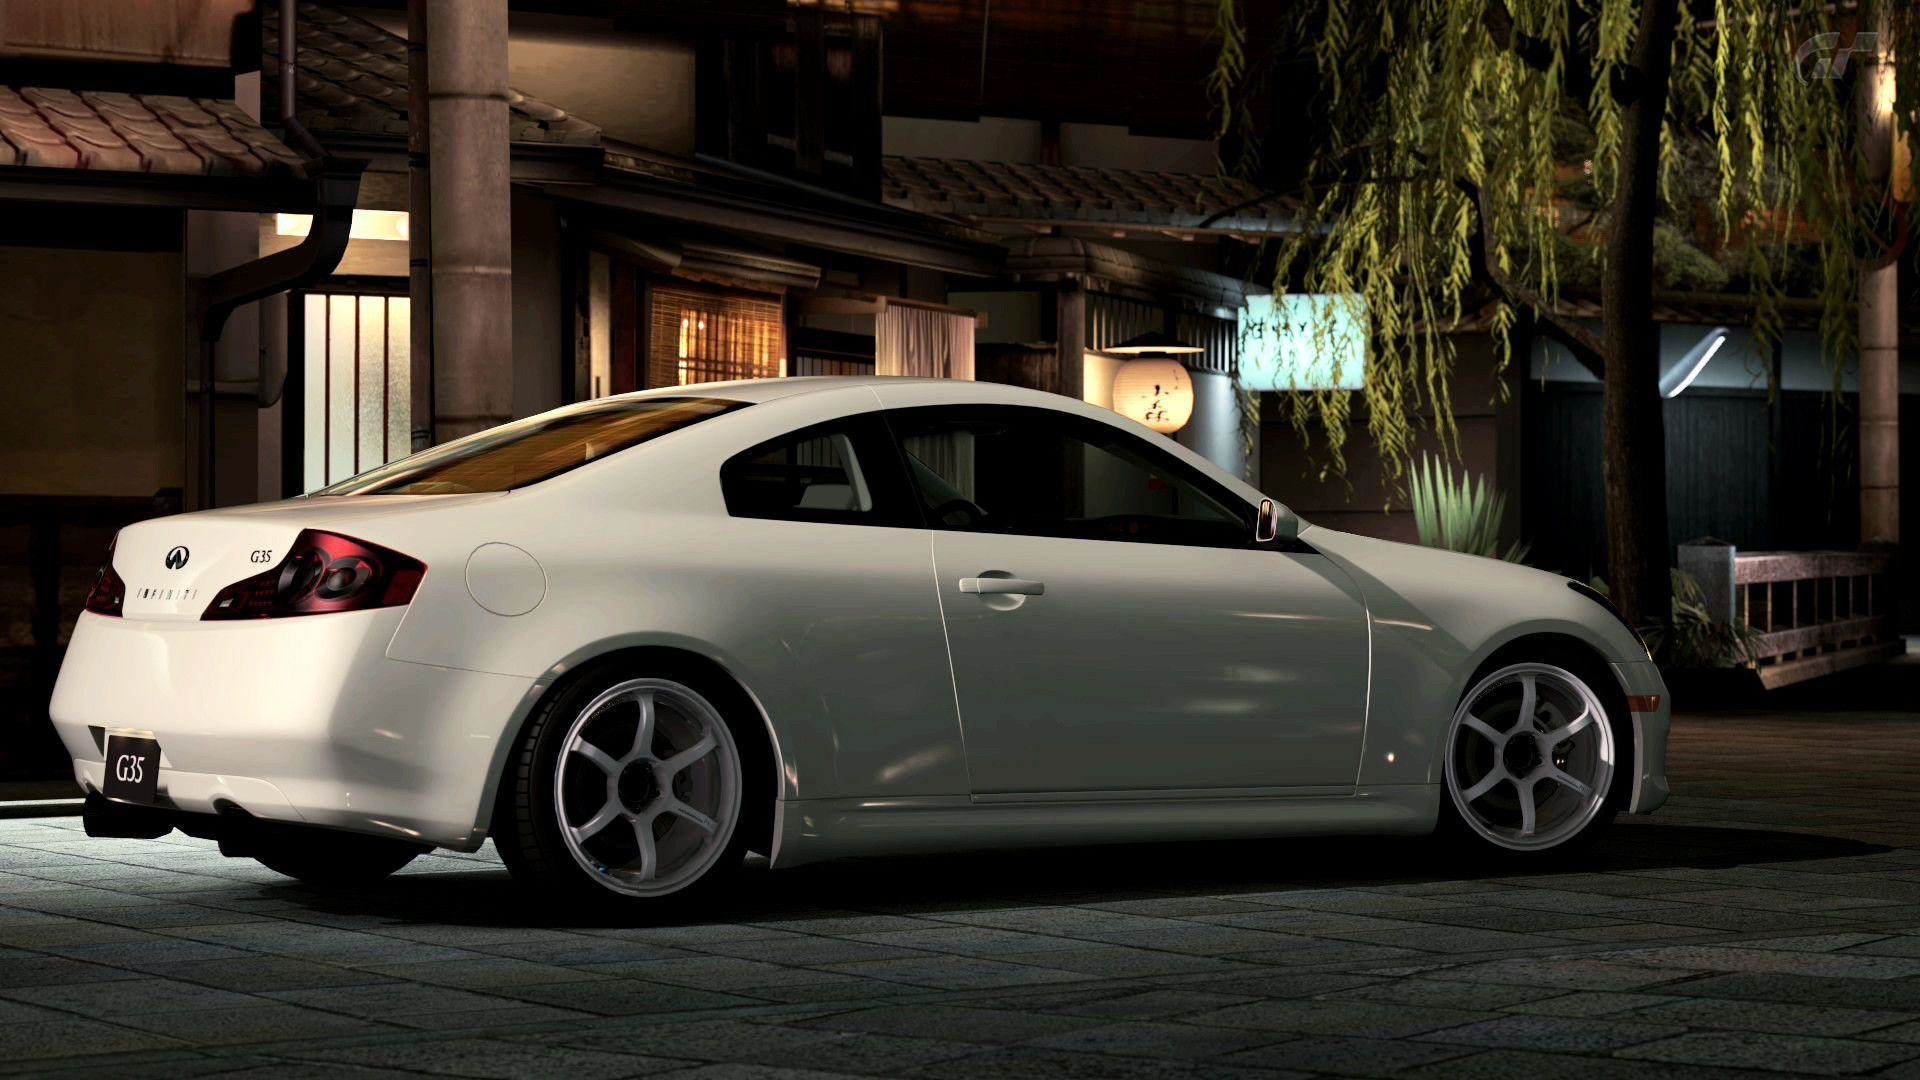 1920x1080 Infiniti G35 Coupe Wallpaper - Viewing Gallery